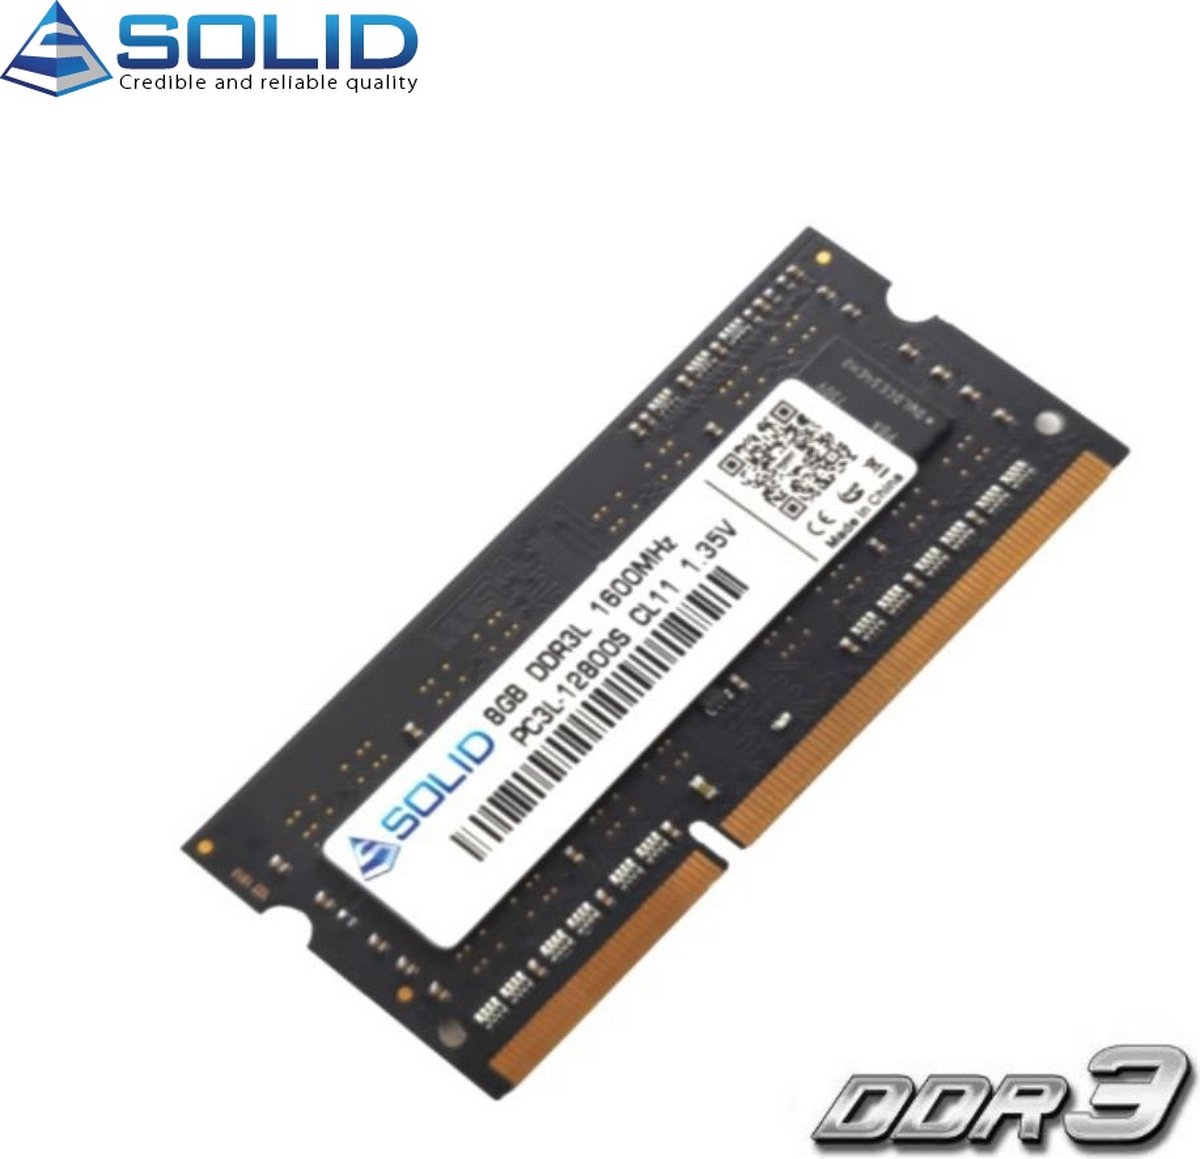 Solid - 8.GB DDR3L (1600Mhz - PC3L-12800) Sodimm laptop / notebook geheugen